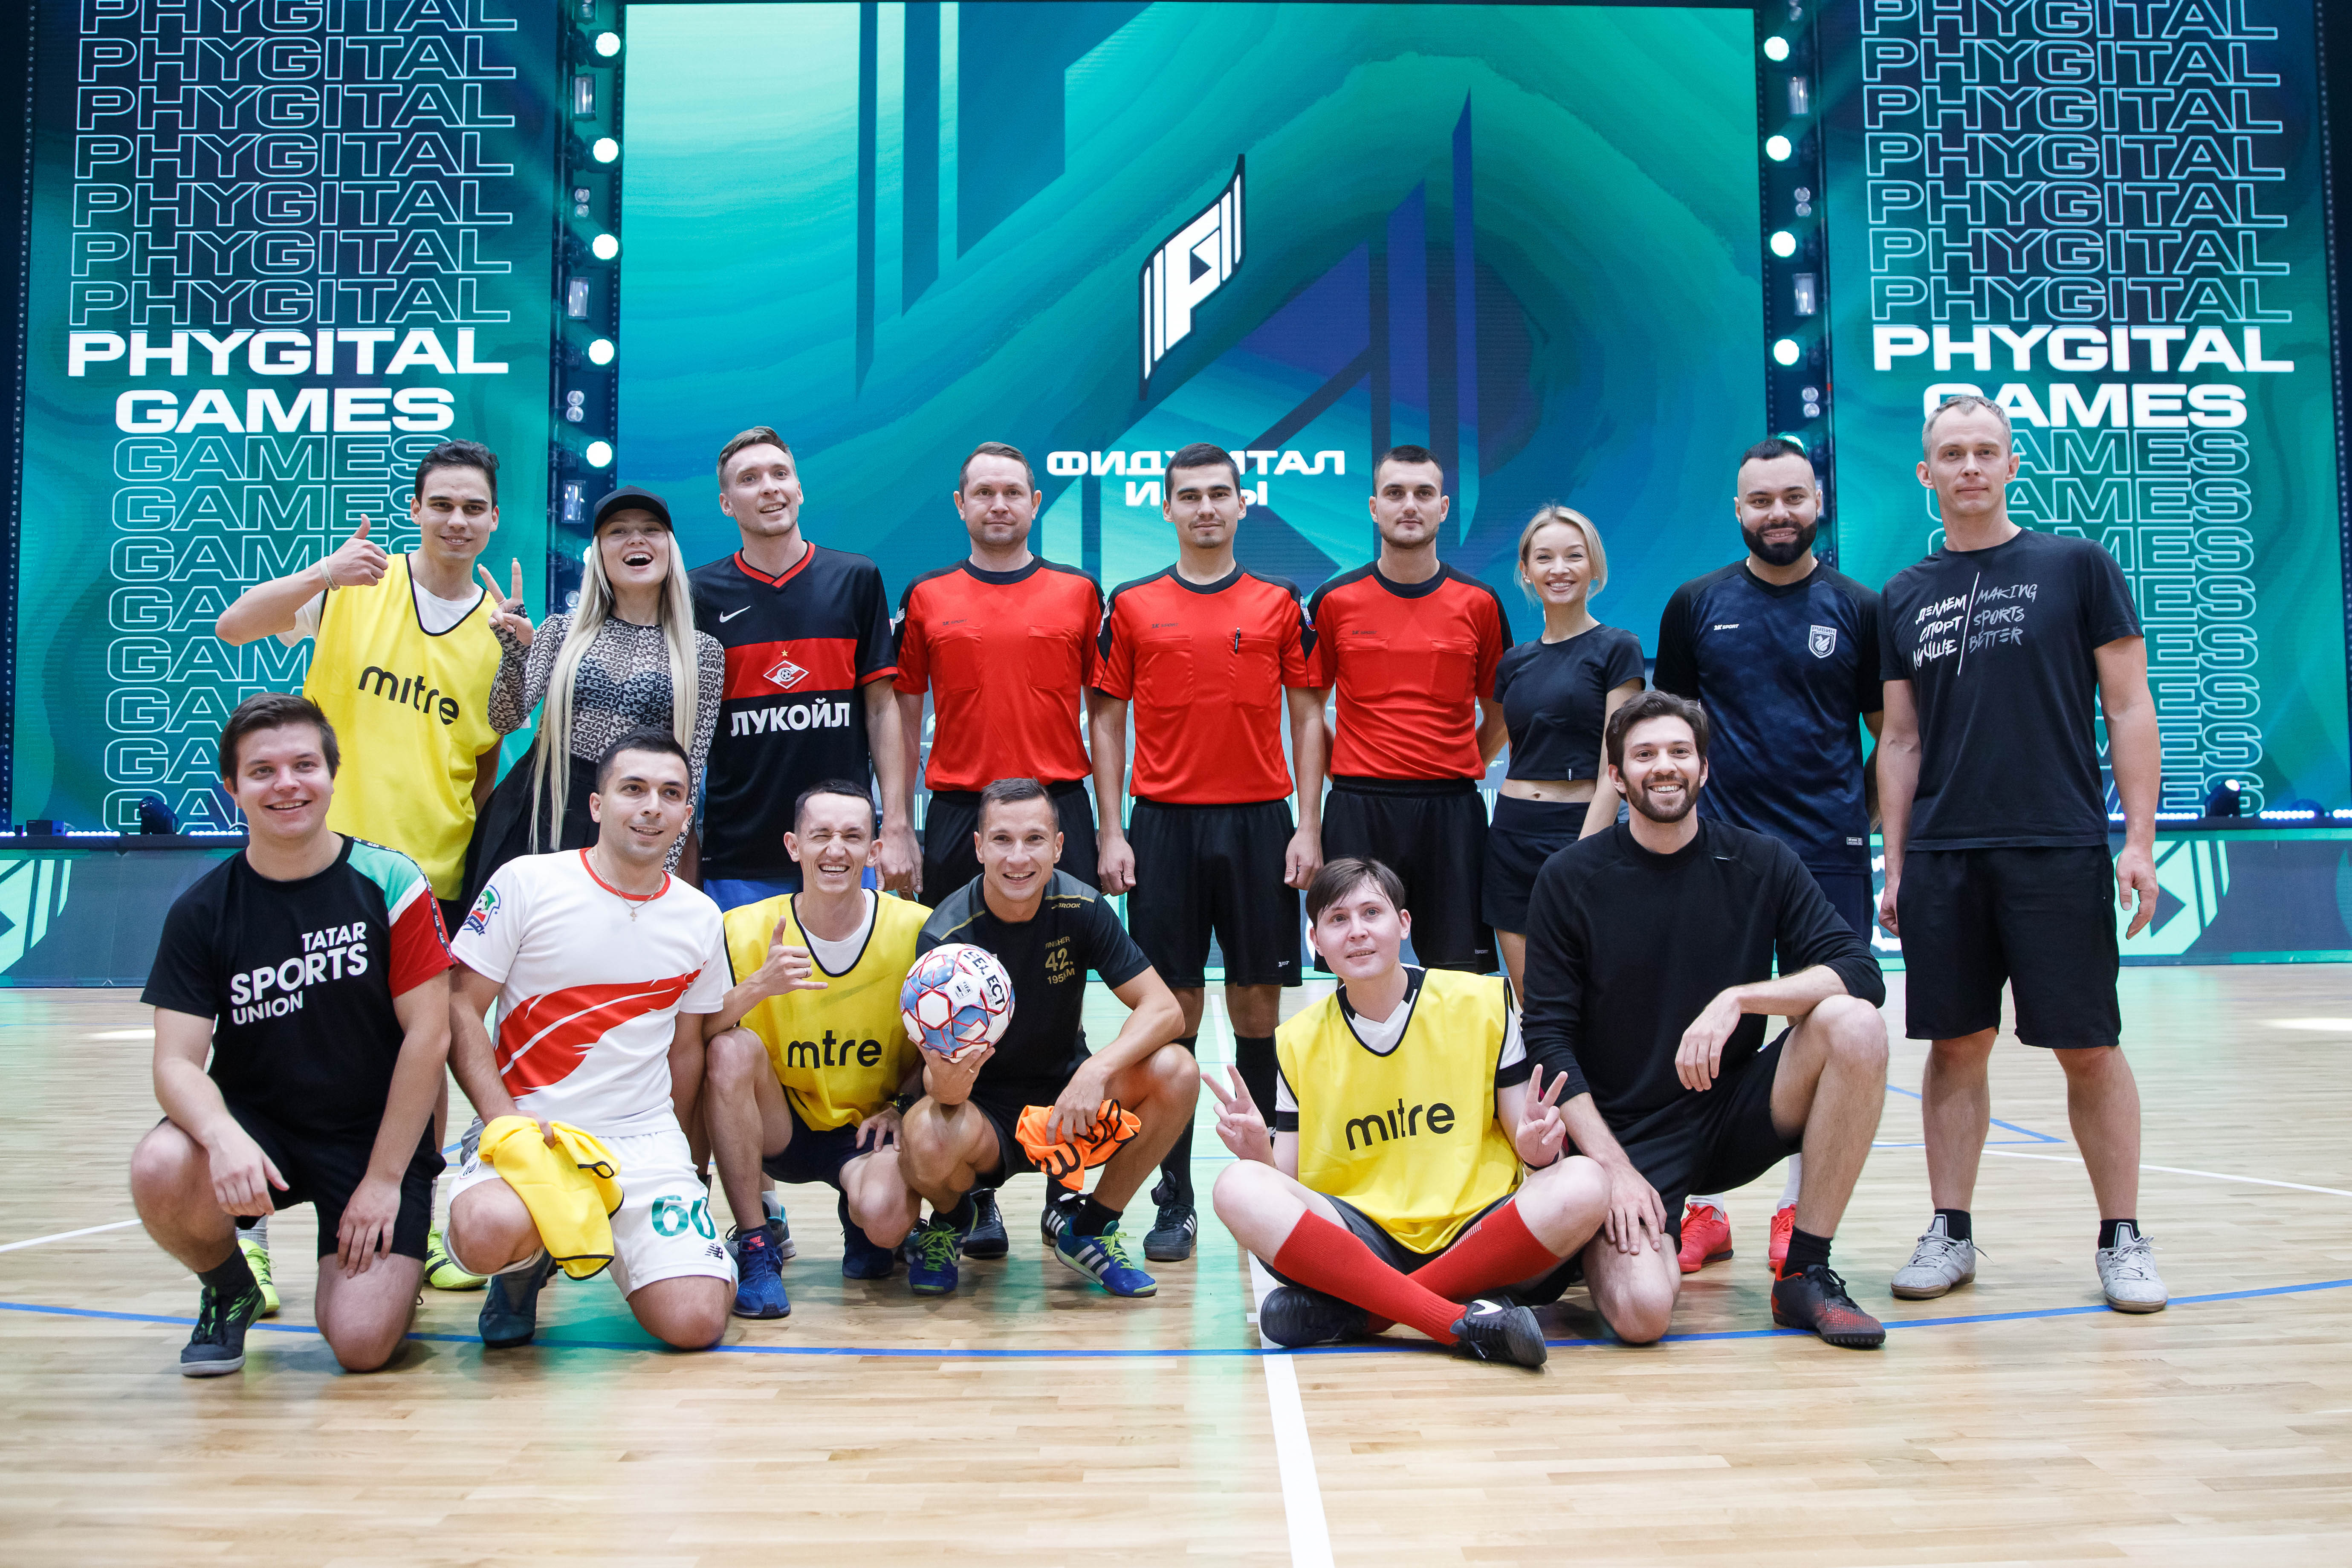 Friendly phygital football match between bloggers and media took place at the Kazan Expo